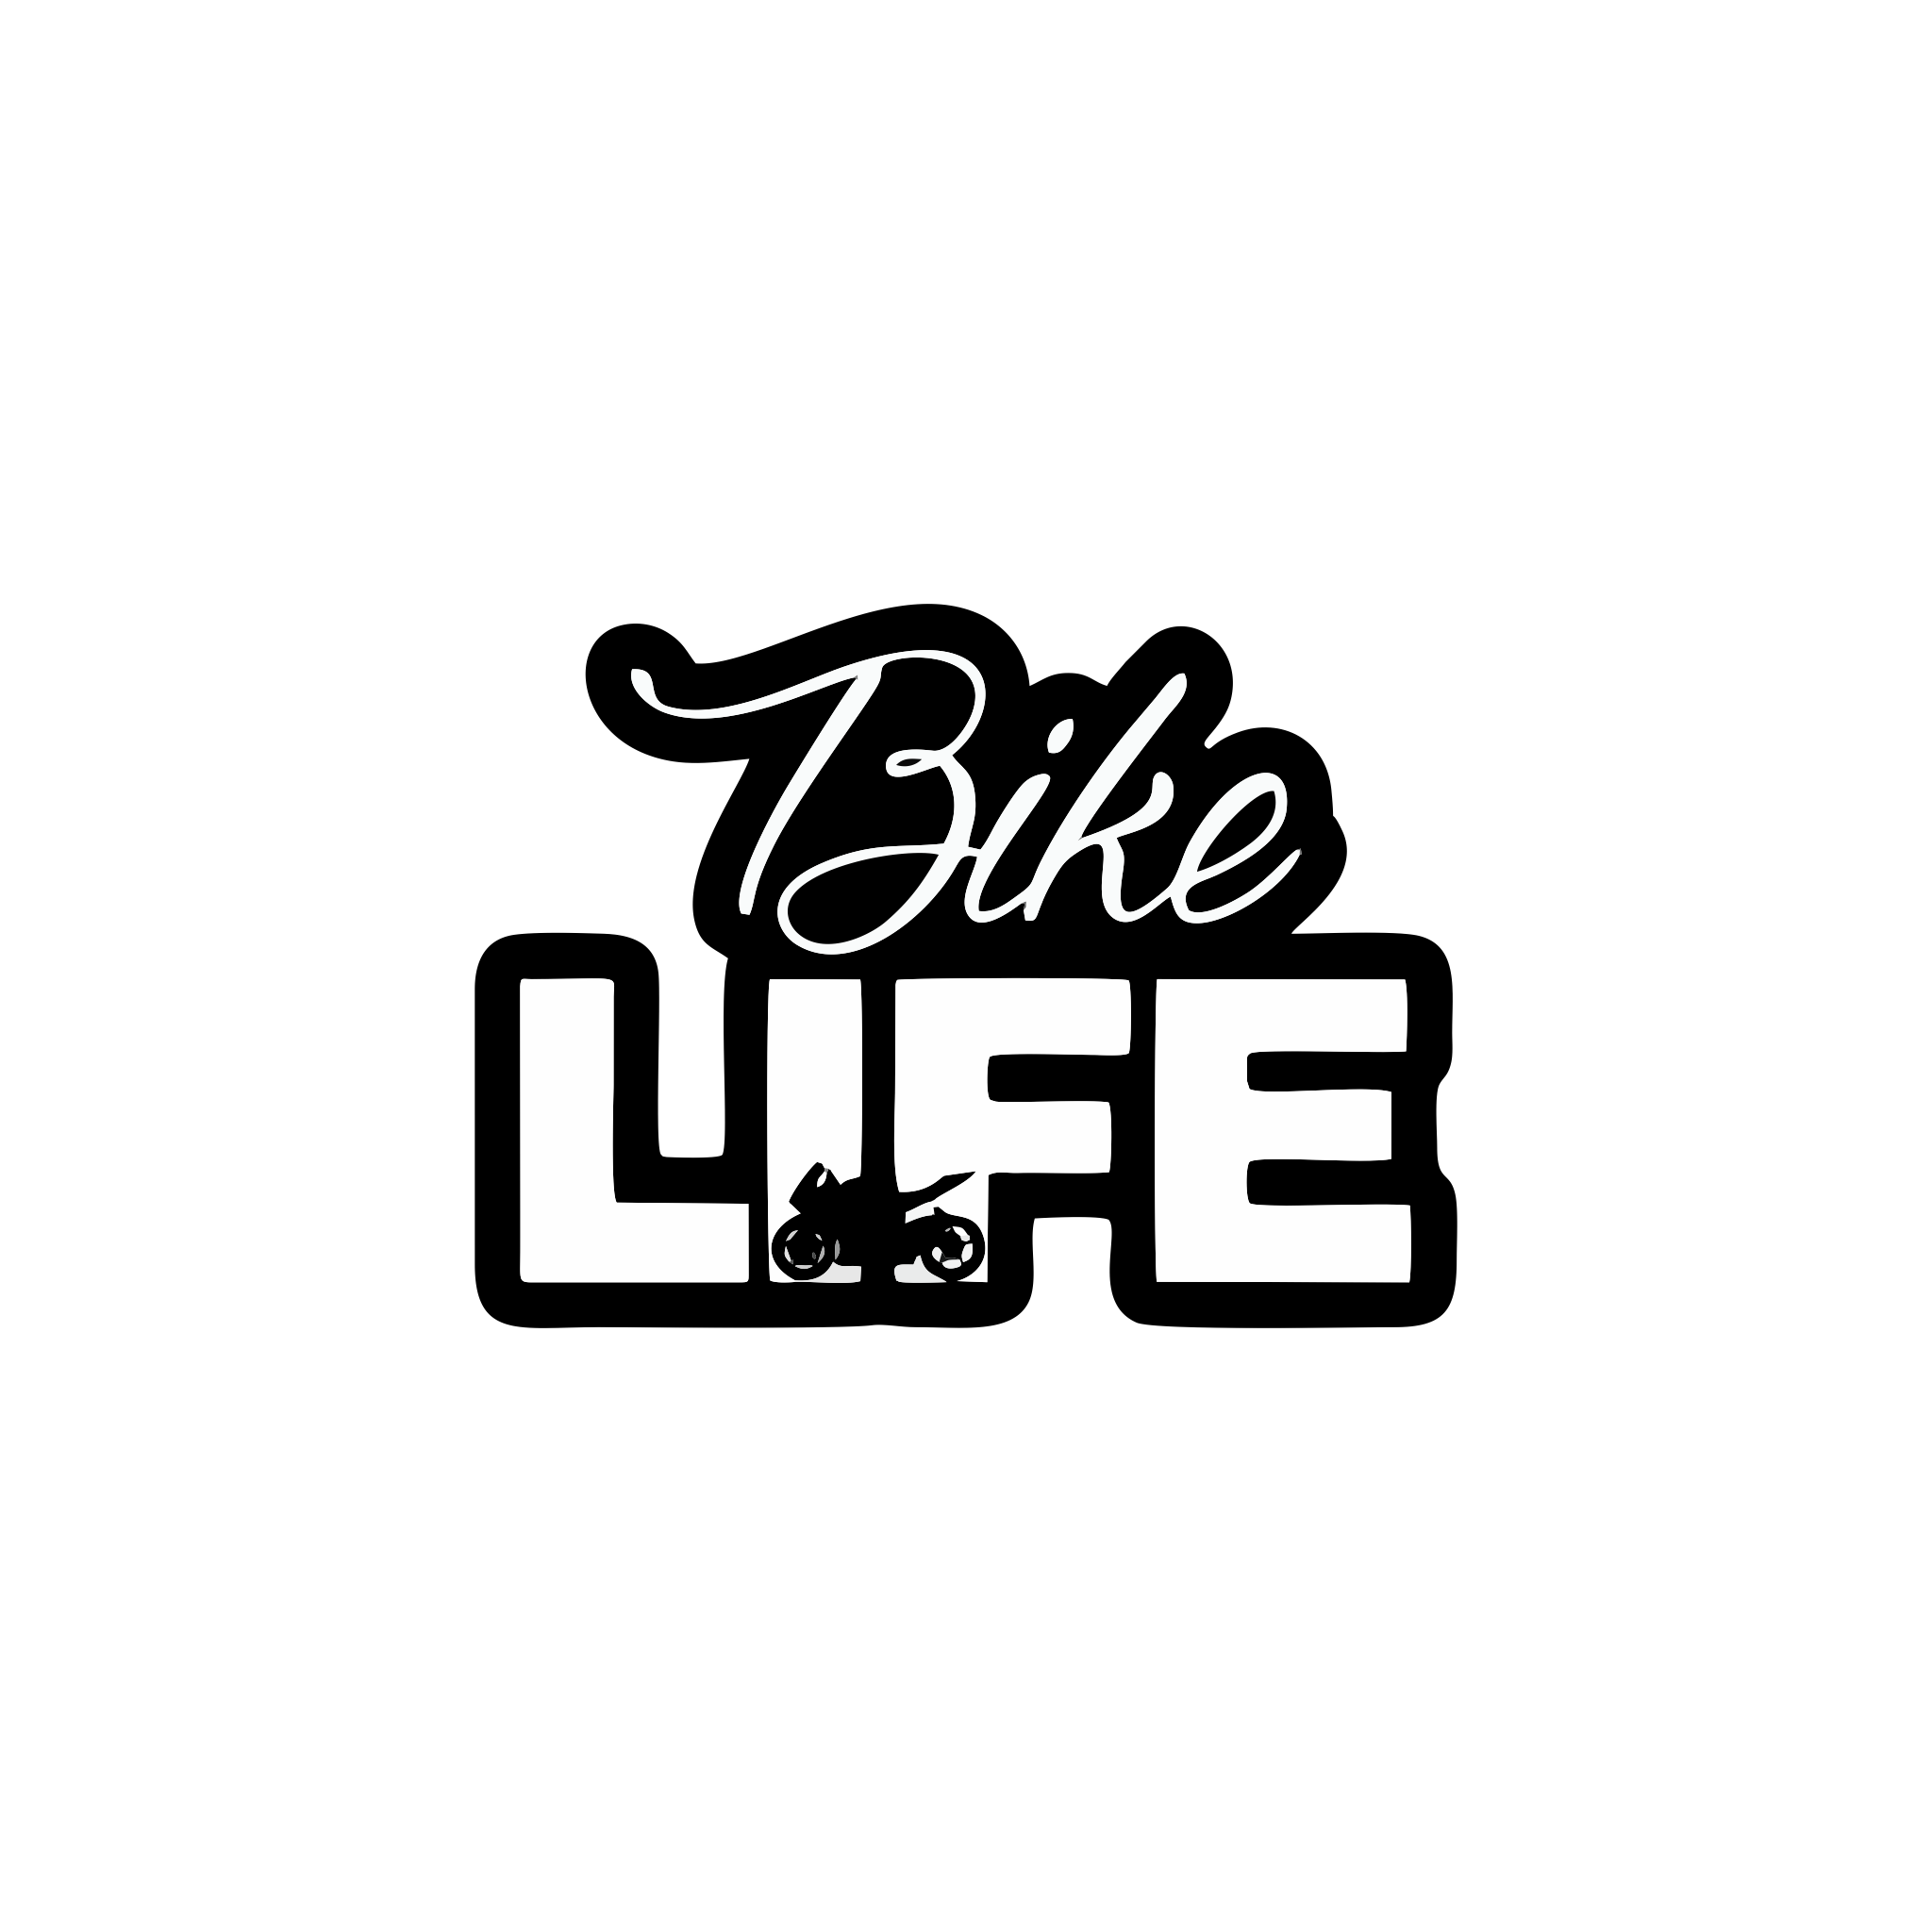 Bike life logo street style Photographic Print by comores22